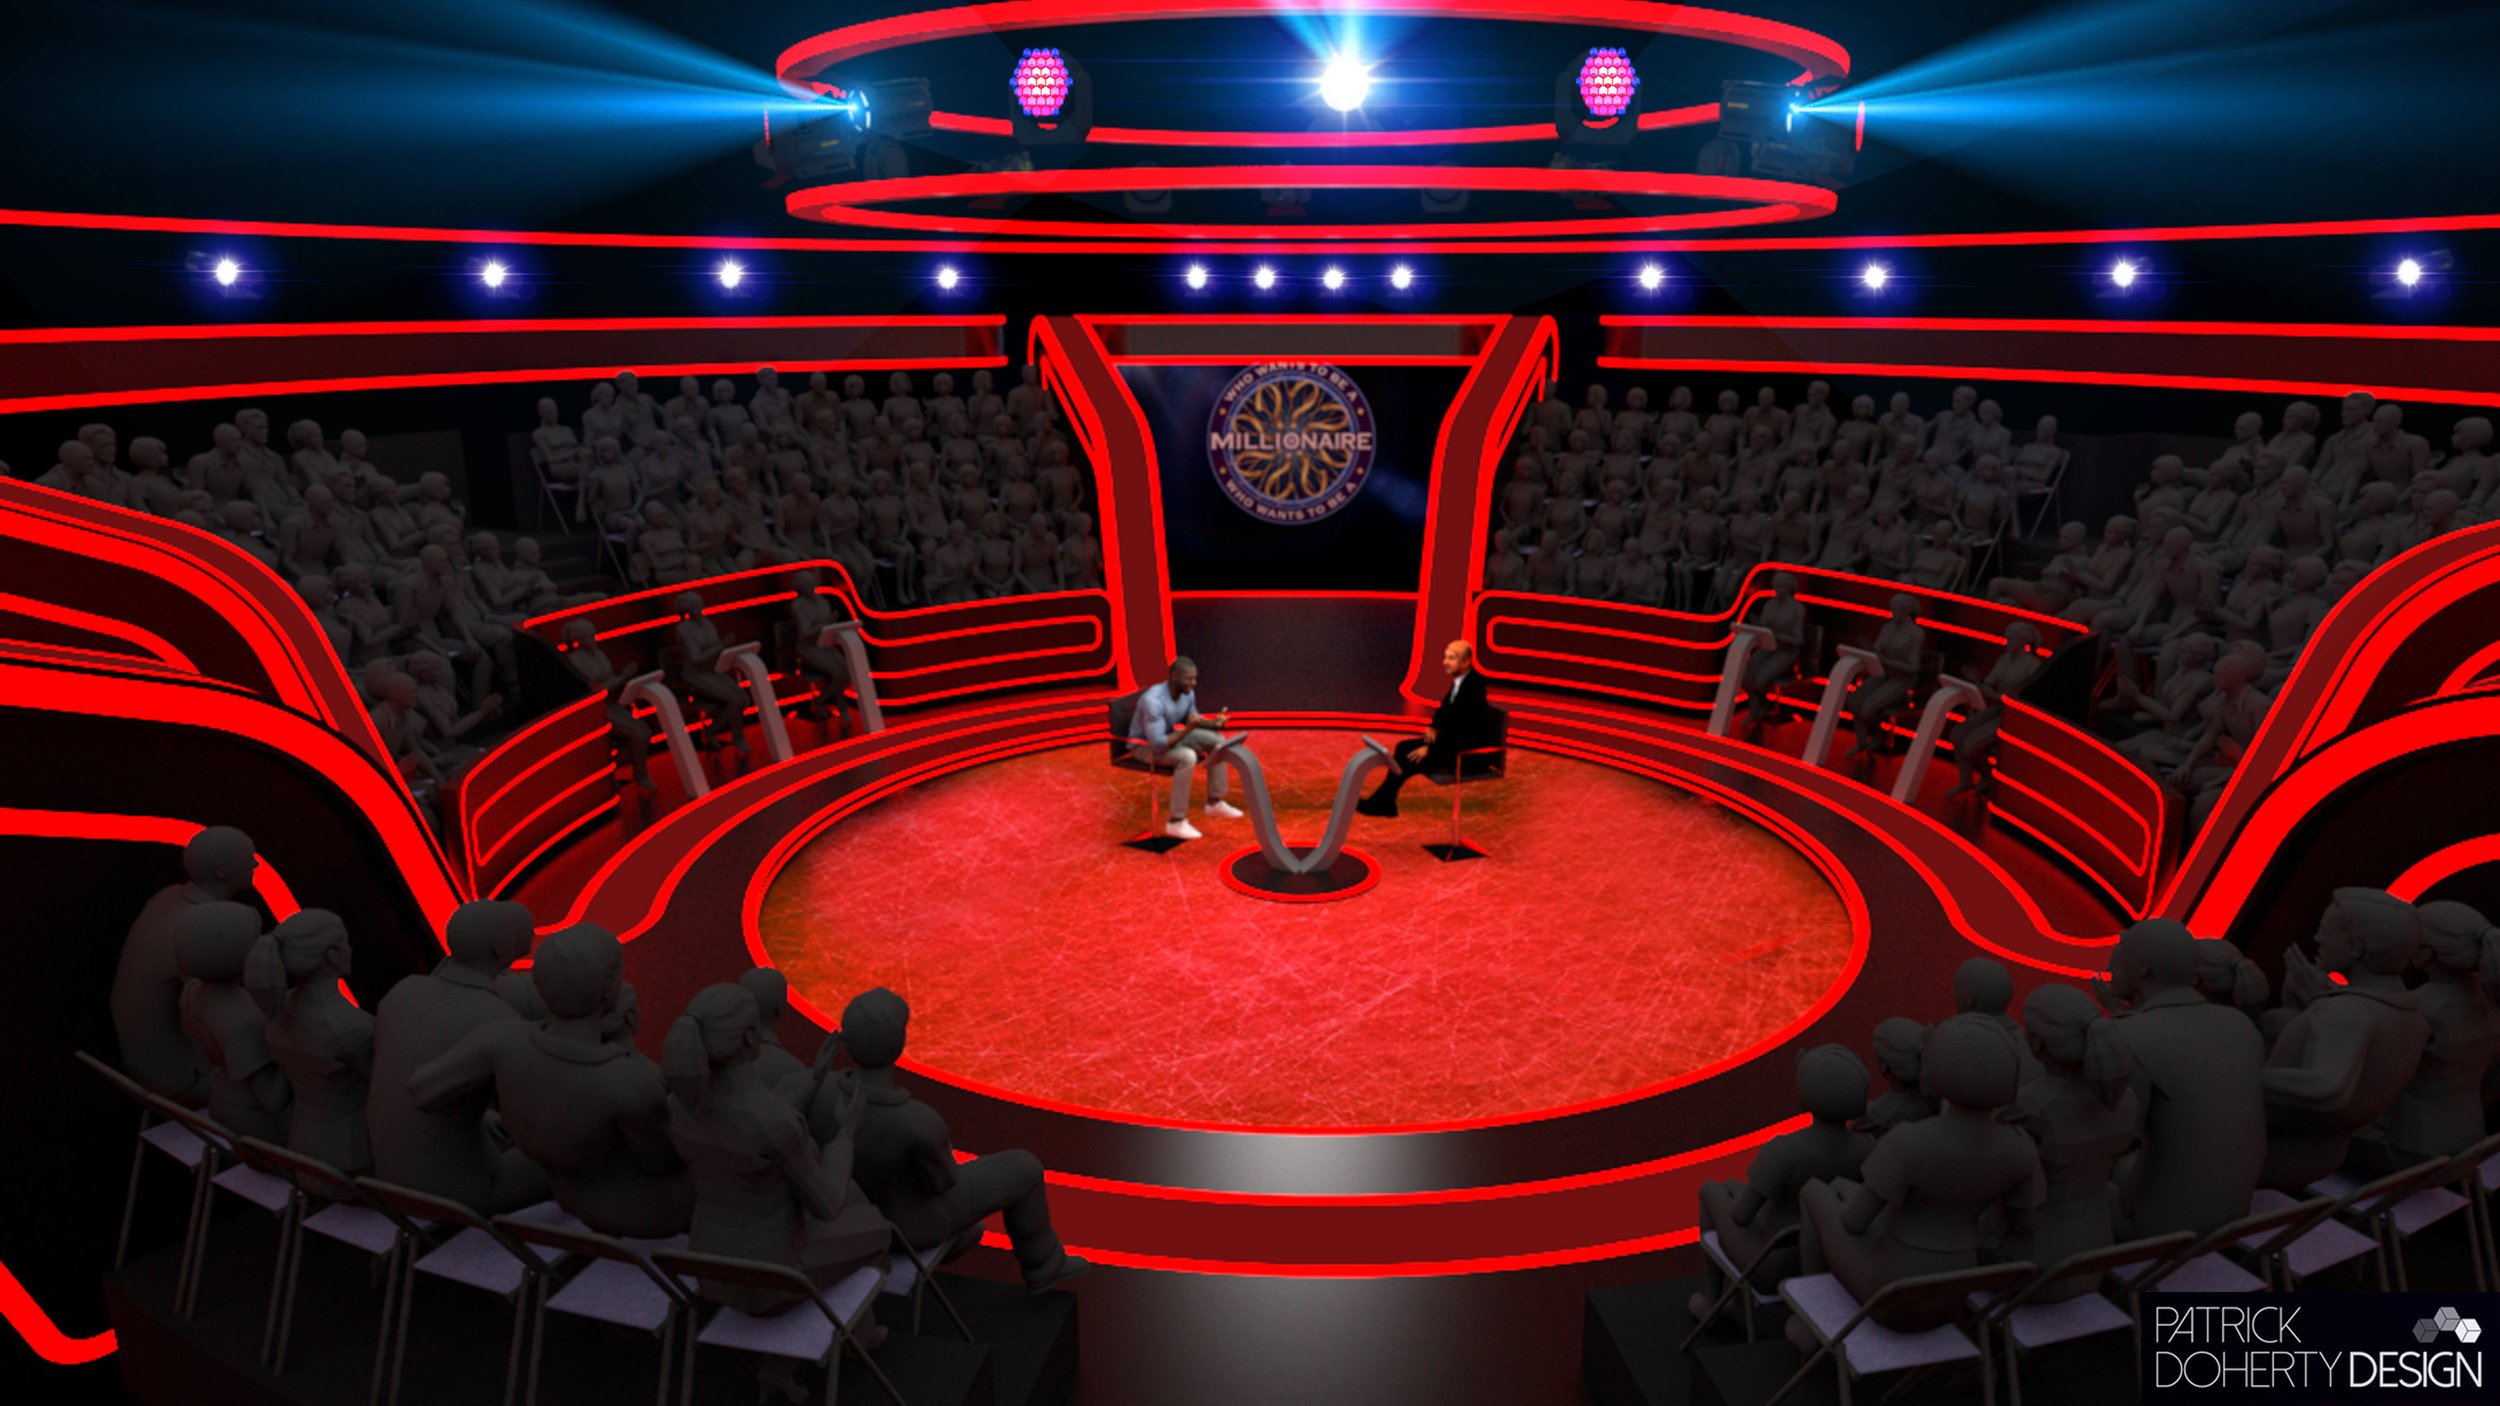 Visuals Who Wants To Be A Millionaire Patrick Doherty Design